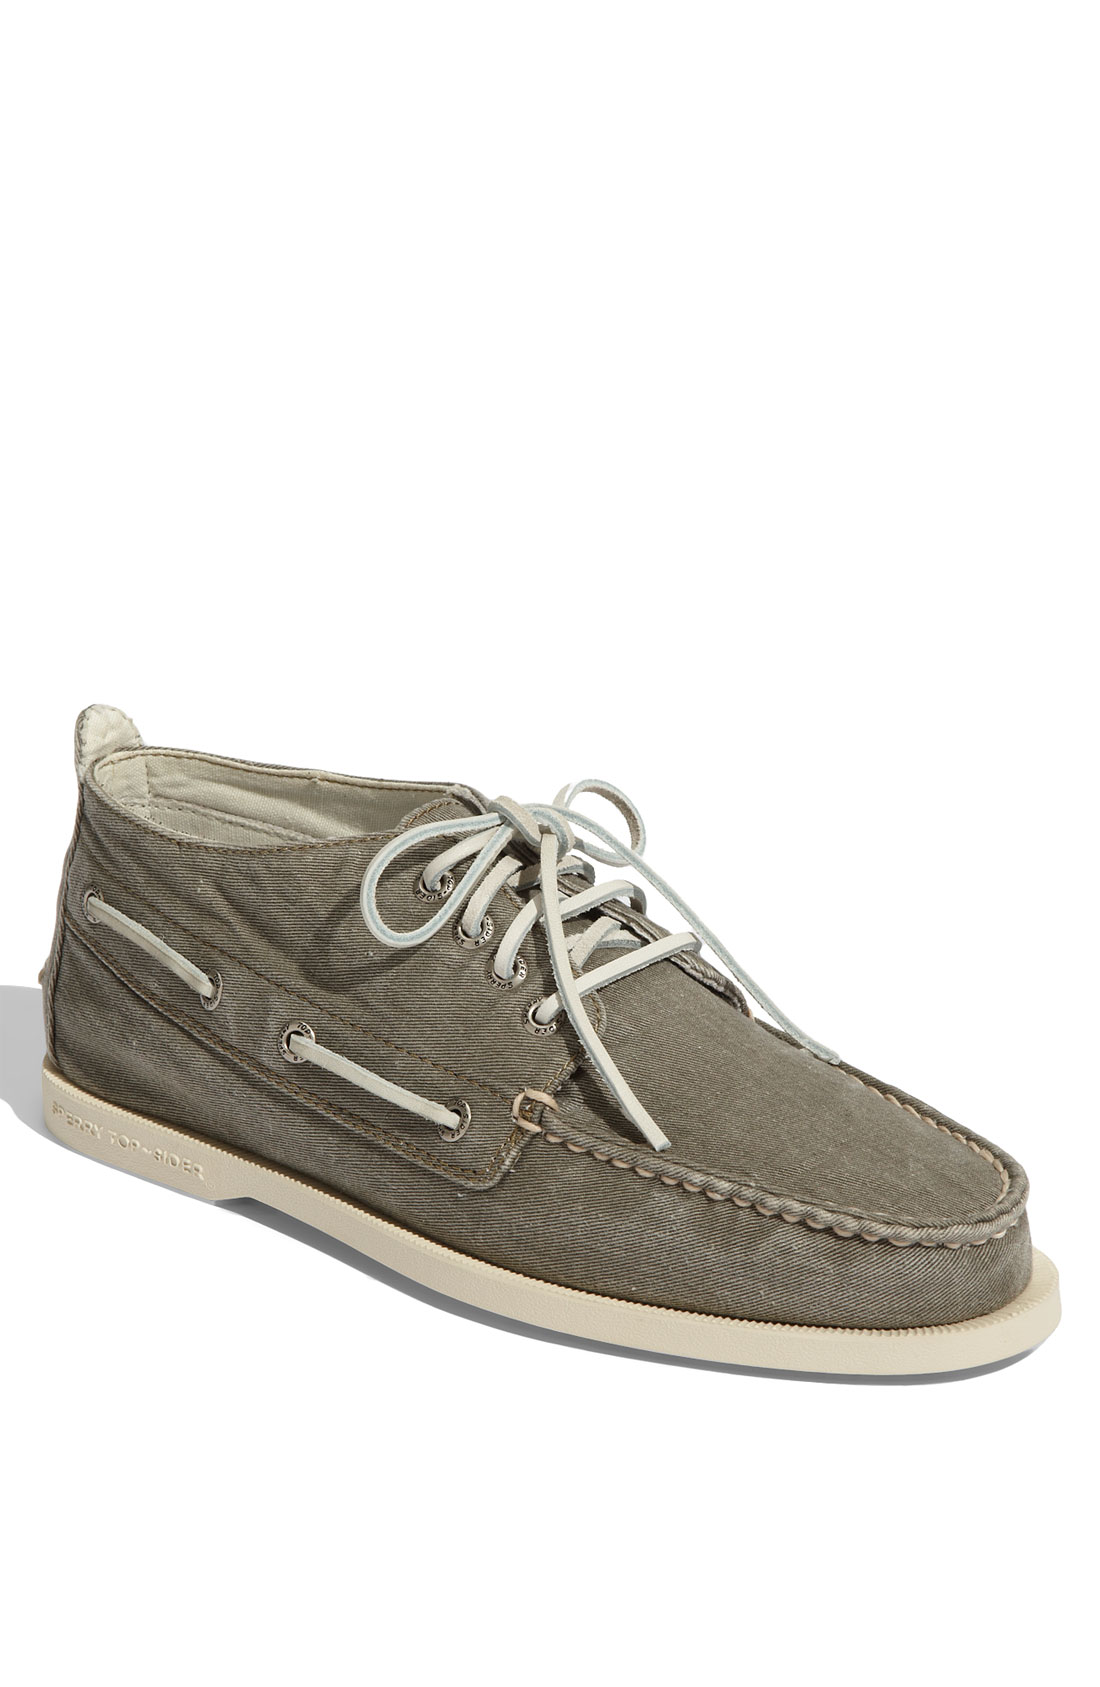 Sperry Top-sider Chukka Canvas Boat Shoe in Green for Men (olive salt ...